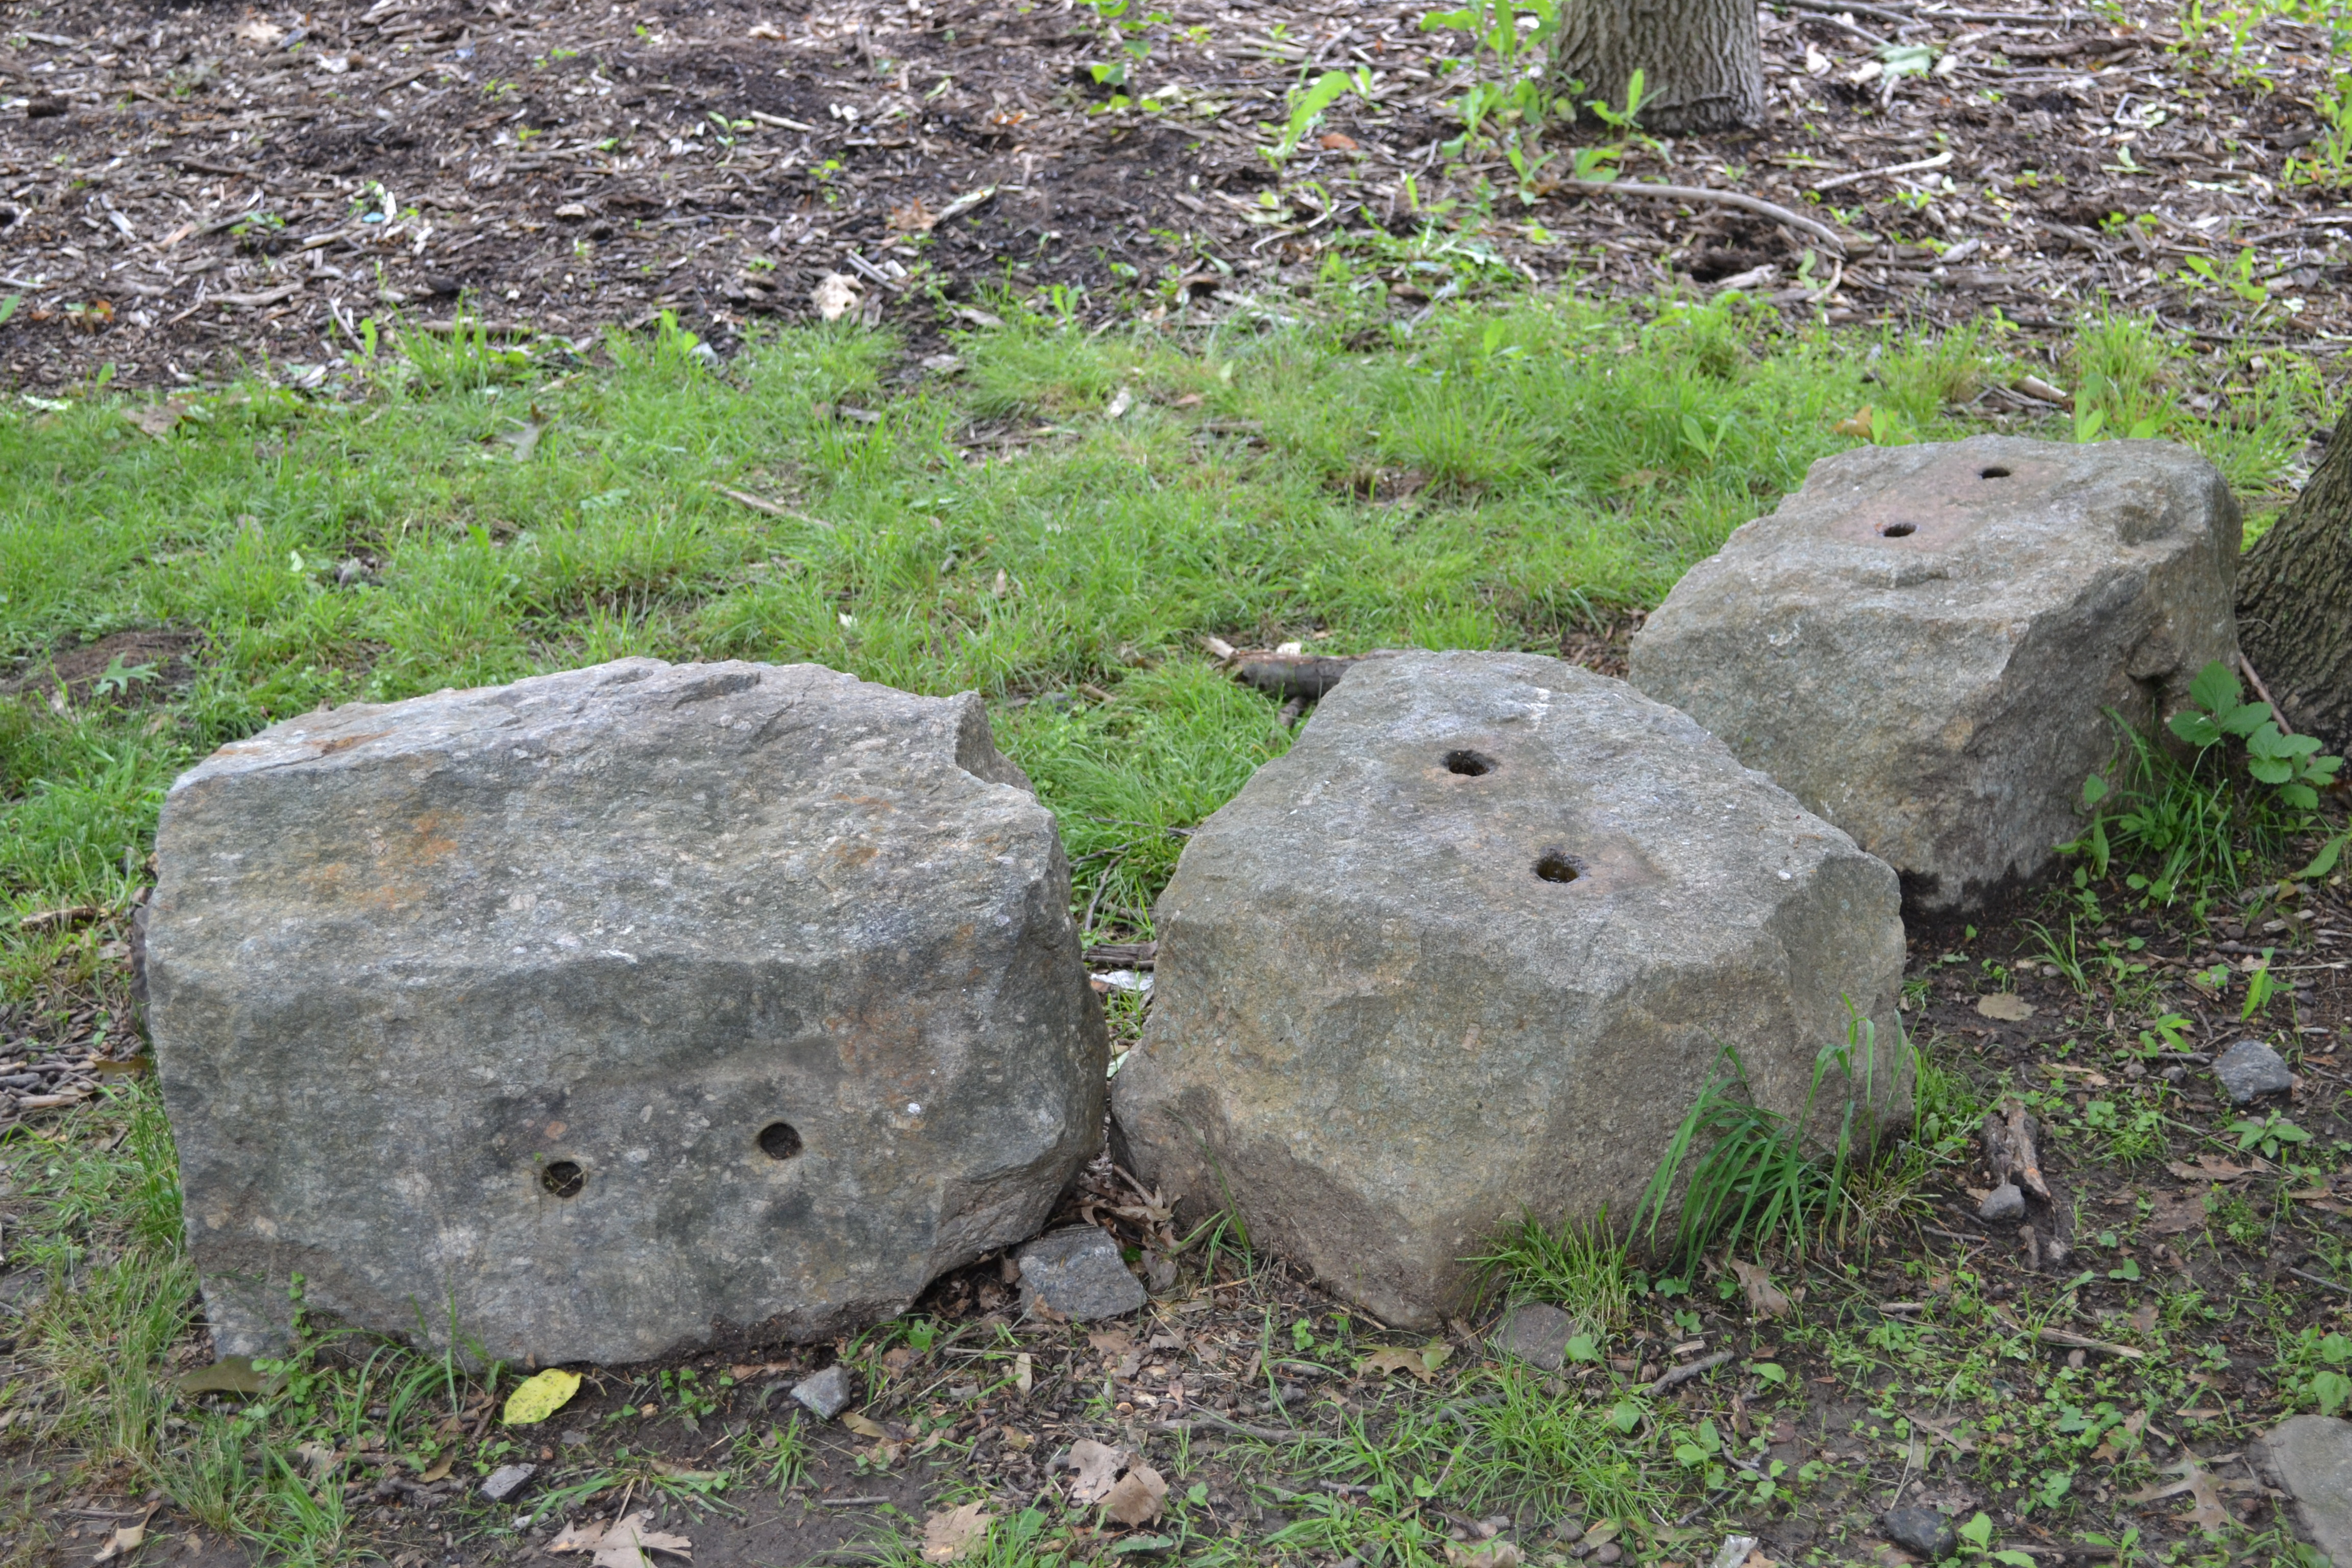 Old sleeper stones can be found in the trailhead park